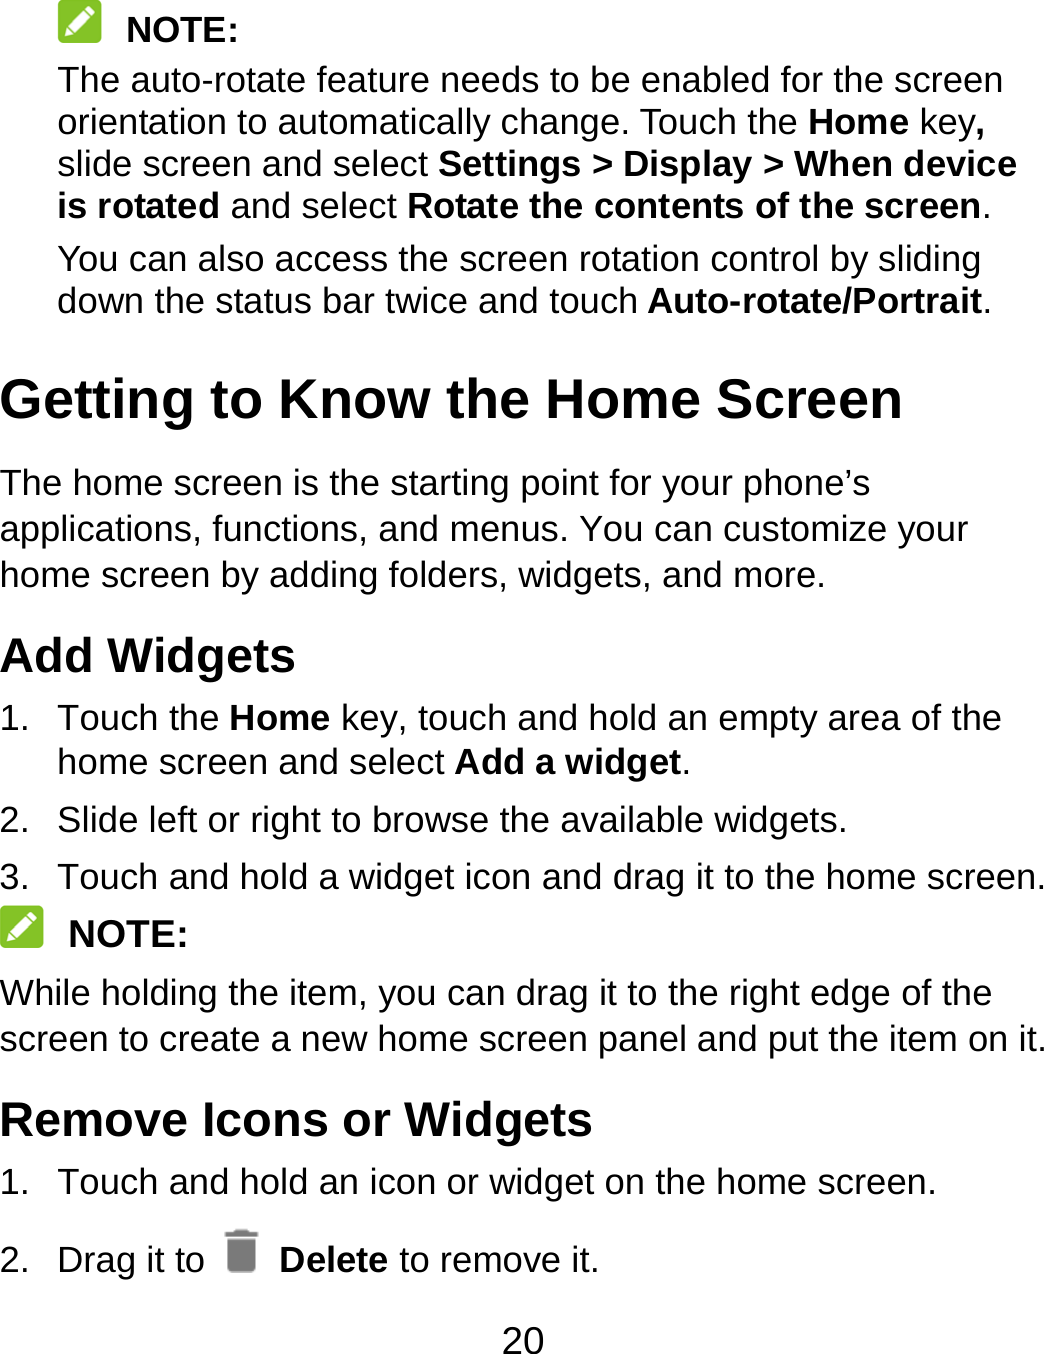 20  NOTE: The auto-rotate feature needs to be enabled for the screen orientation to automatically change. Touch the Home key, slide screen and select Settings &gt; Display &gt; When device is rotated and select Rotate the contents of the screen. You can also access the screen rotation control by sliding down the status bar twice and touch Auto-rotate/Portrait. Getting to Know the Home Screen The home screen is the starting point for your phone’s applications, functions, and menus. You can customize your home screen by adding folders, widgets, and more.   Add Widgets 1. Touch the Home key, touch and hold an empty area of the home screen and select Add a widget. 2.  Slide left or right to browse the available widgets. 3.  Touch and hold a widget icon and drag it to the home screen.    NOTE: While holding the item, you can drag it to the right edge of the screen to create a new home screen panel and put the item on it. Remove Icons or Widgets 1.  Touch and hold an icon or widget on the home screen. 2. Drag it to   Delete to remove it. 